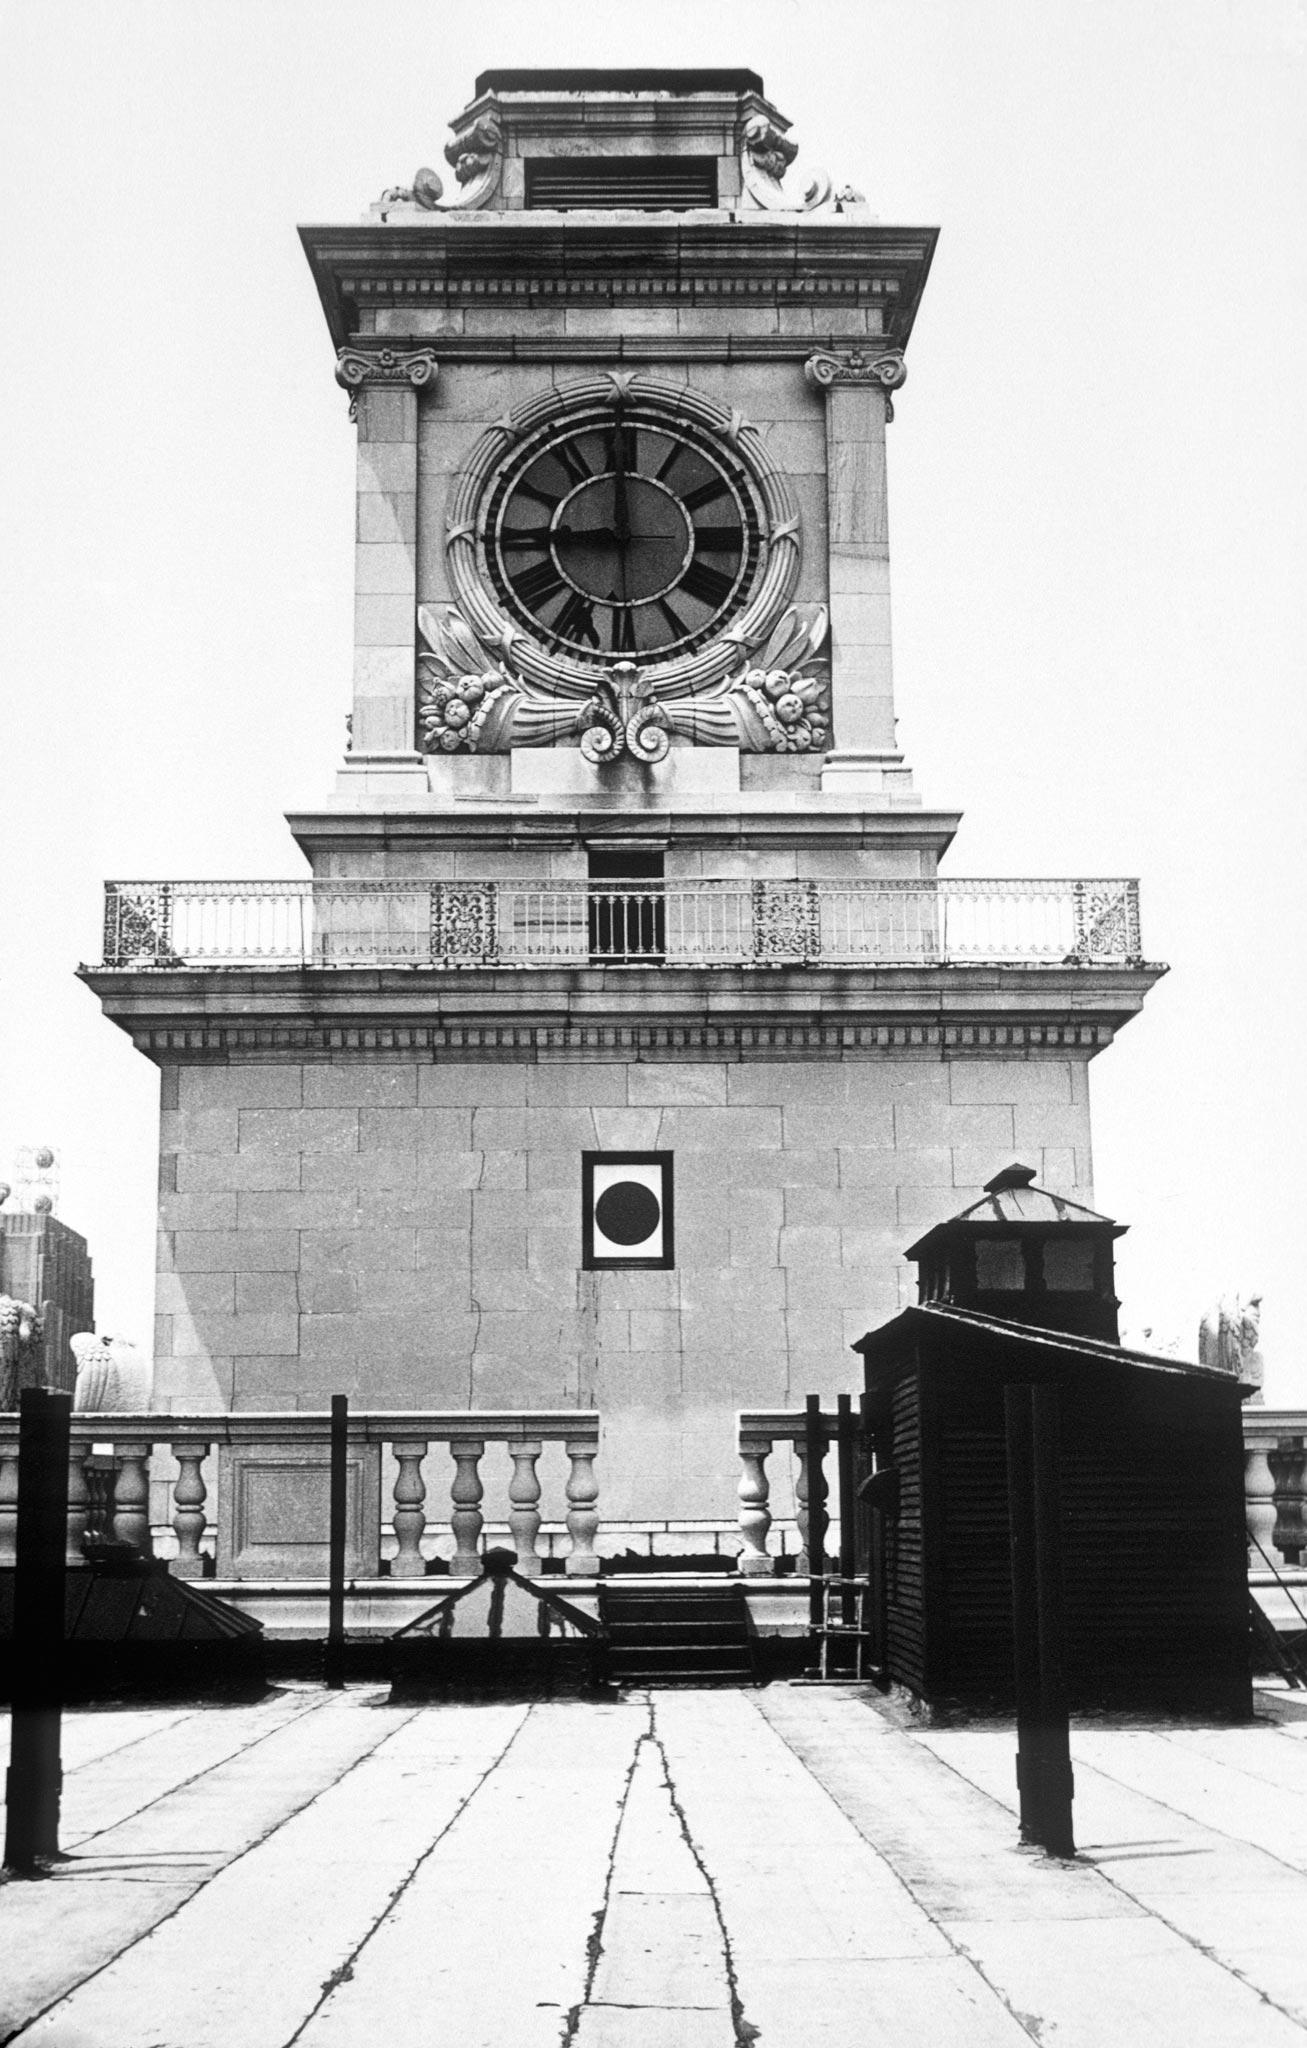 A stone clocktower with a small circular window below the center of the clock face. Black and white.